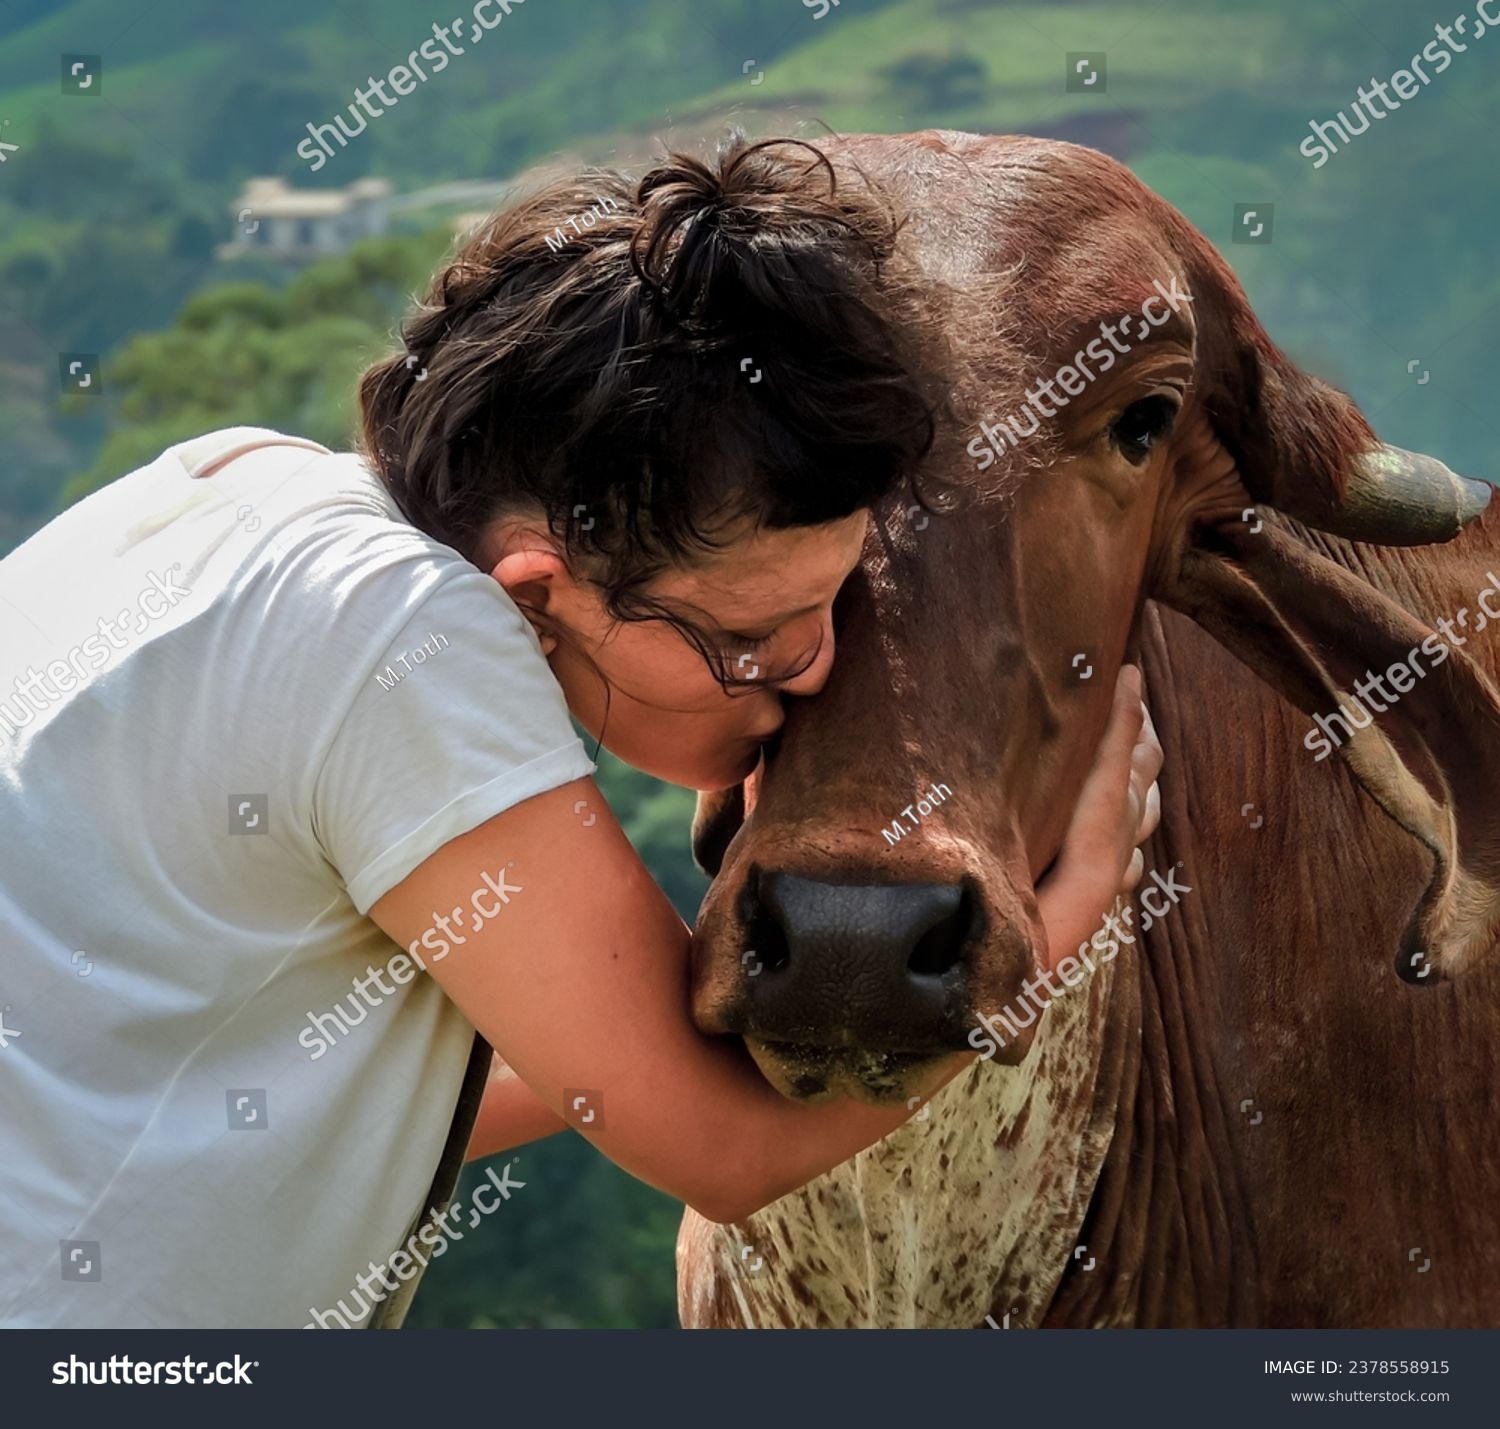 Young woman cuddling and showing affection to a cow by kissing the farm animal on his head. Real life image of true friendship between humans and animals. Vegan Concept and blurred background #2378558915